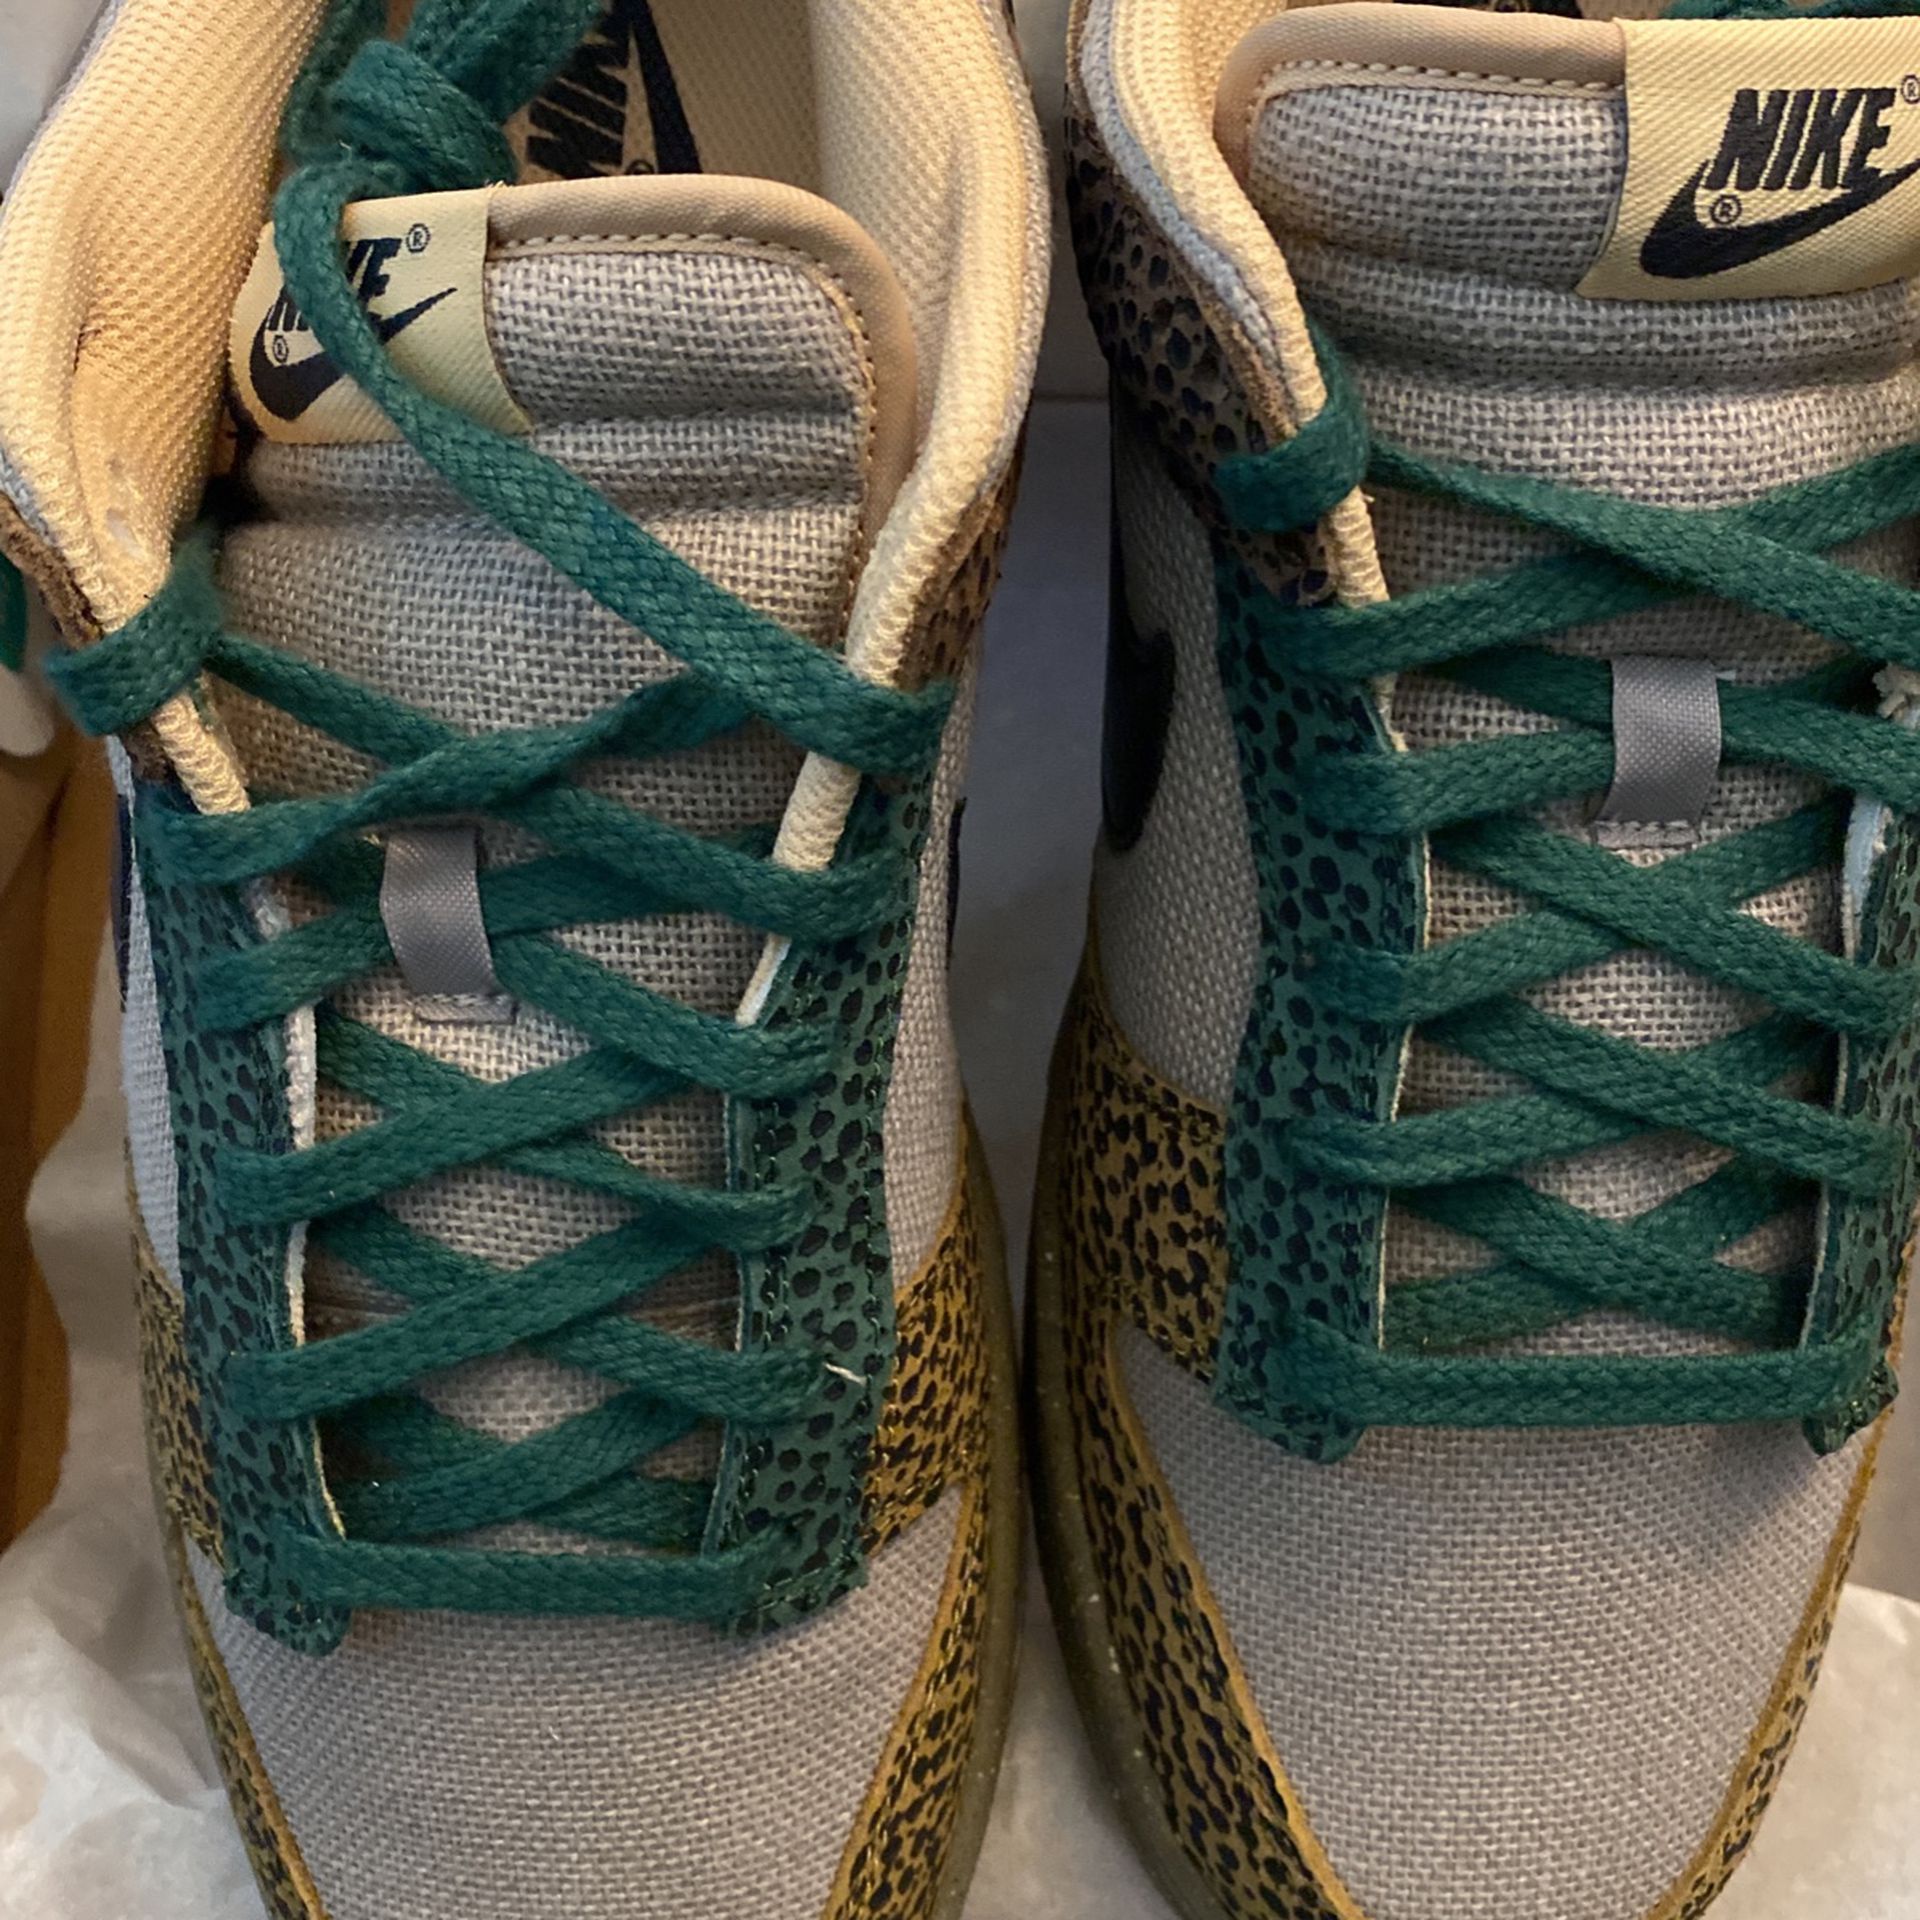 Nike Dunk Low Safari Golden Moss Size 12 for Sale in Beaverton, OR